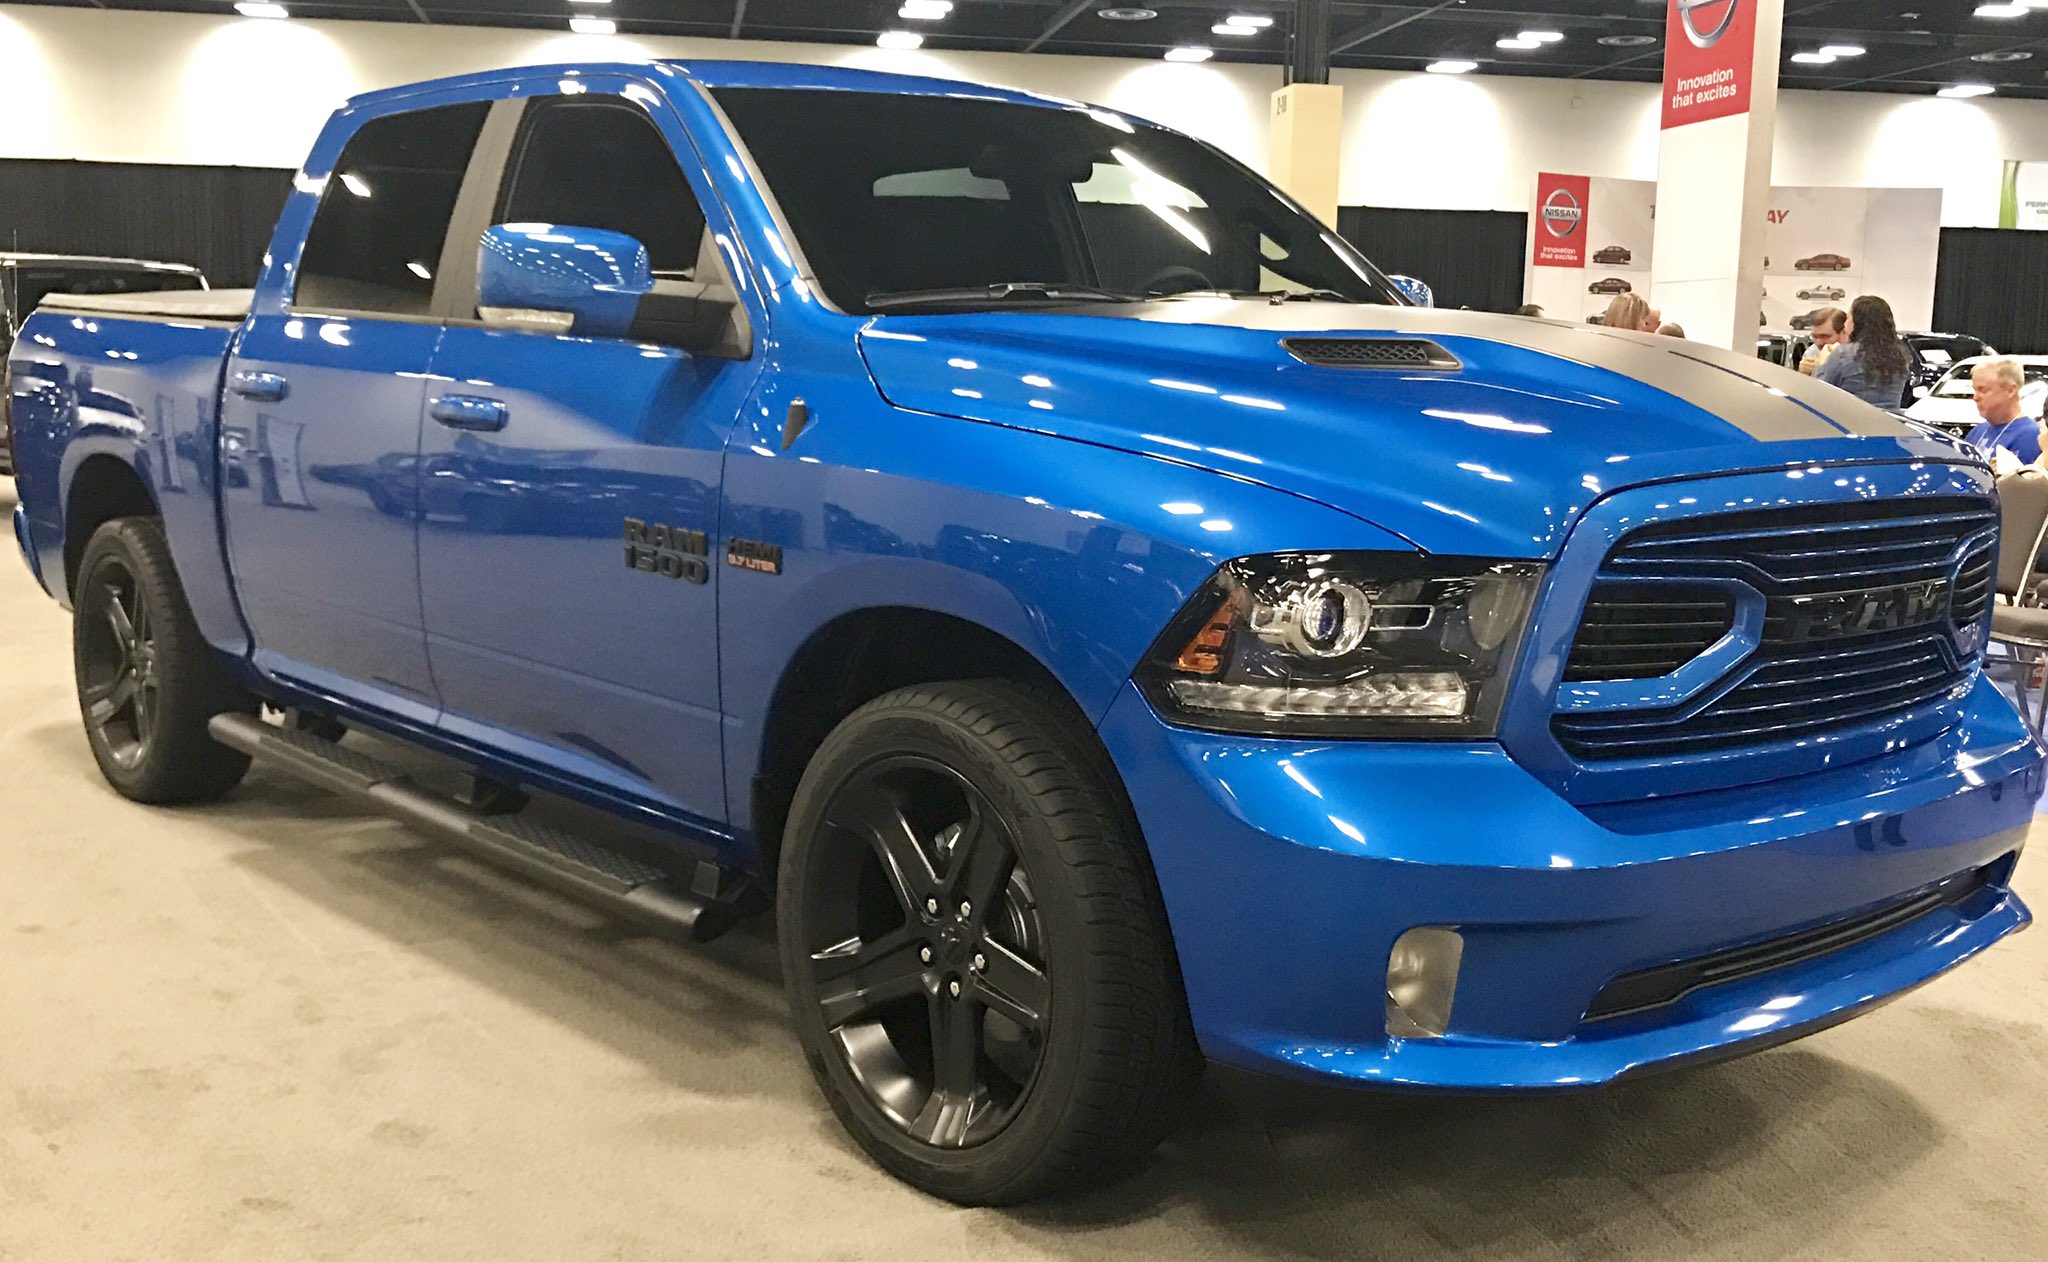 Scott Tilley on Twitter: "Ram unveils new special edition Hydro Blue